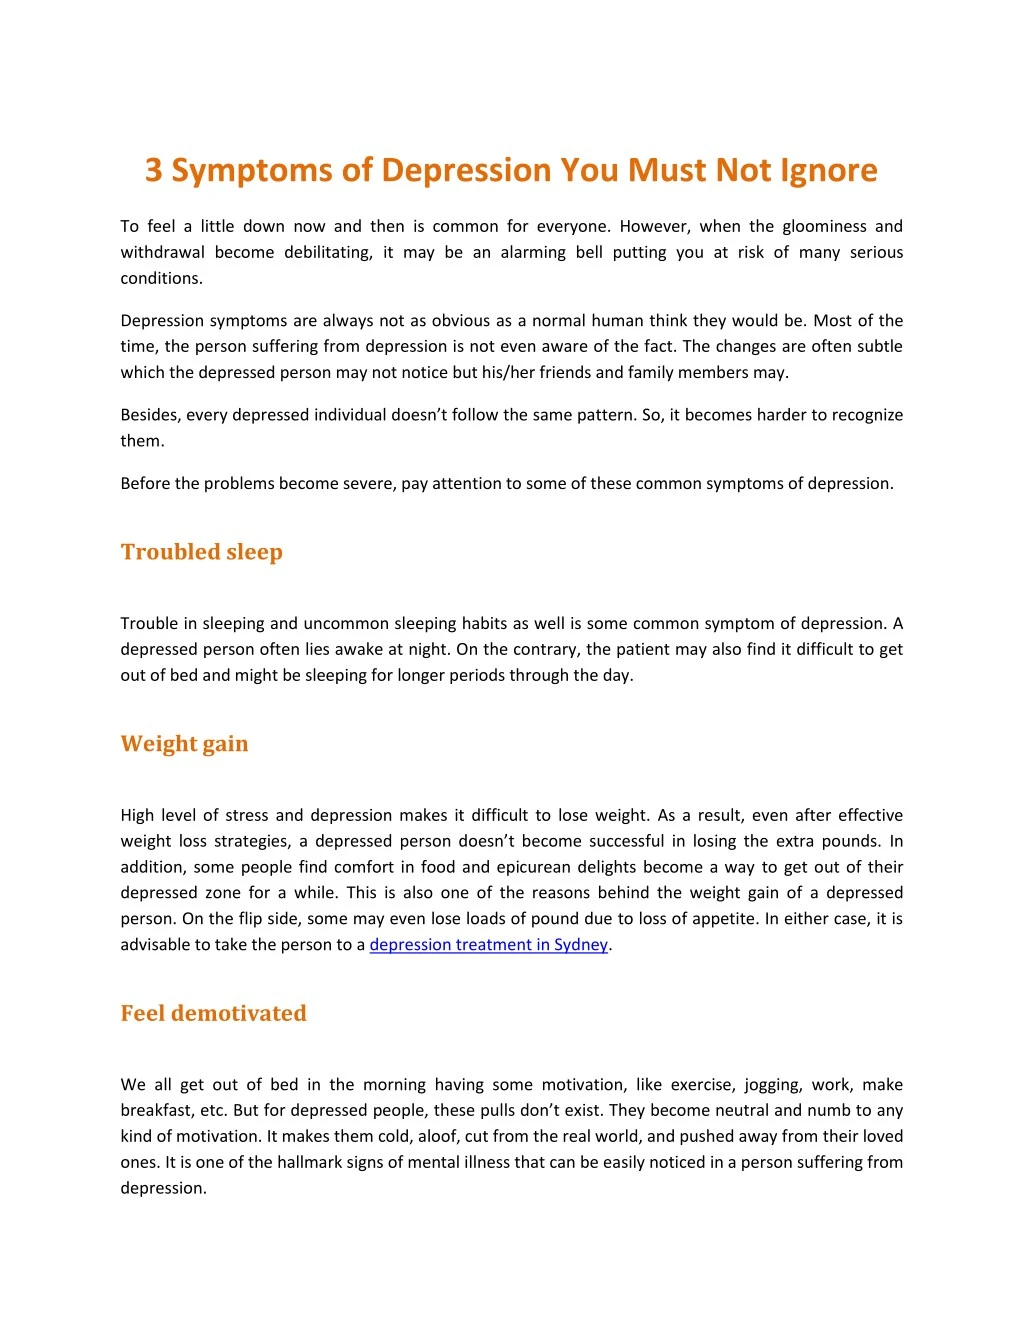 3 symptoms of depression you must not ignore